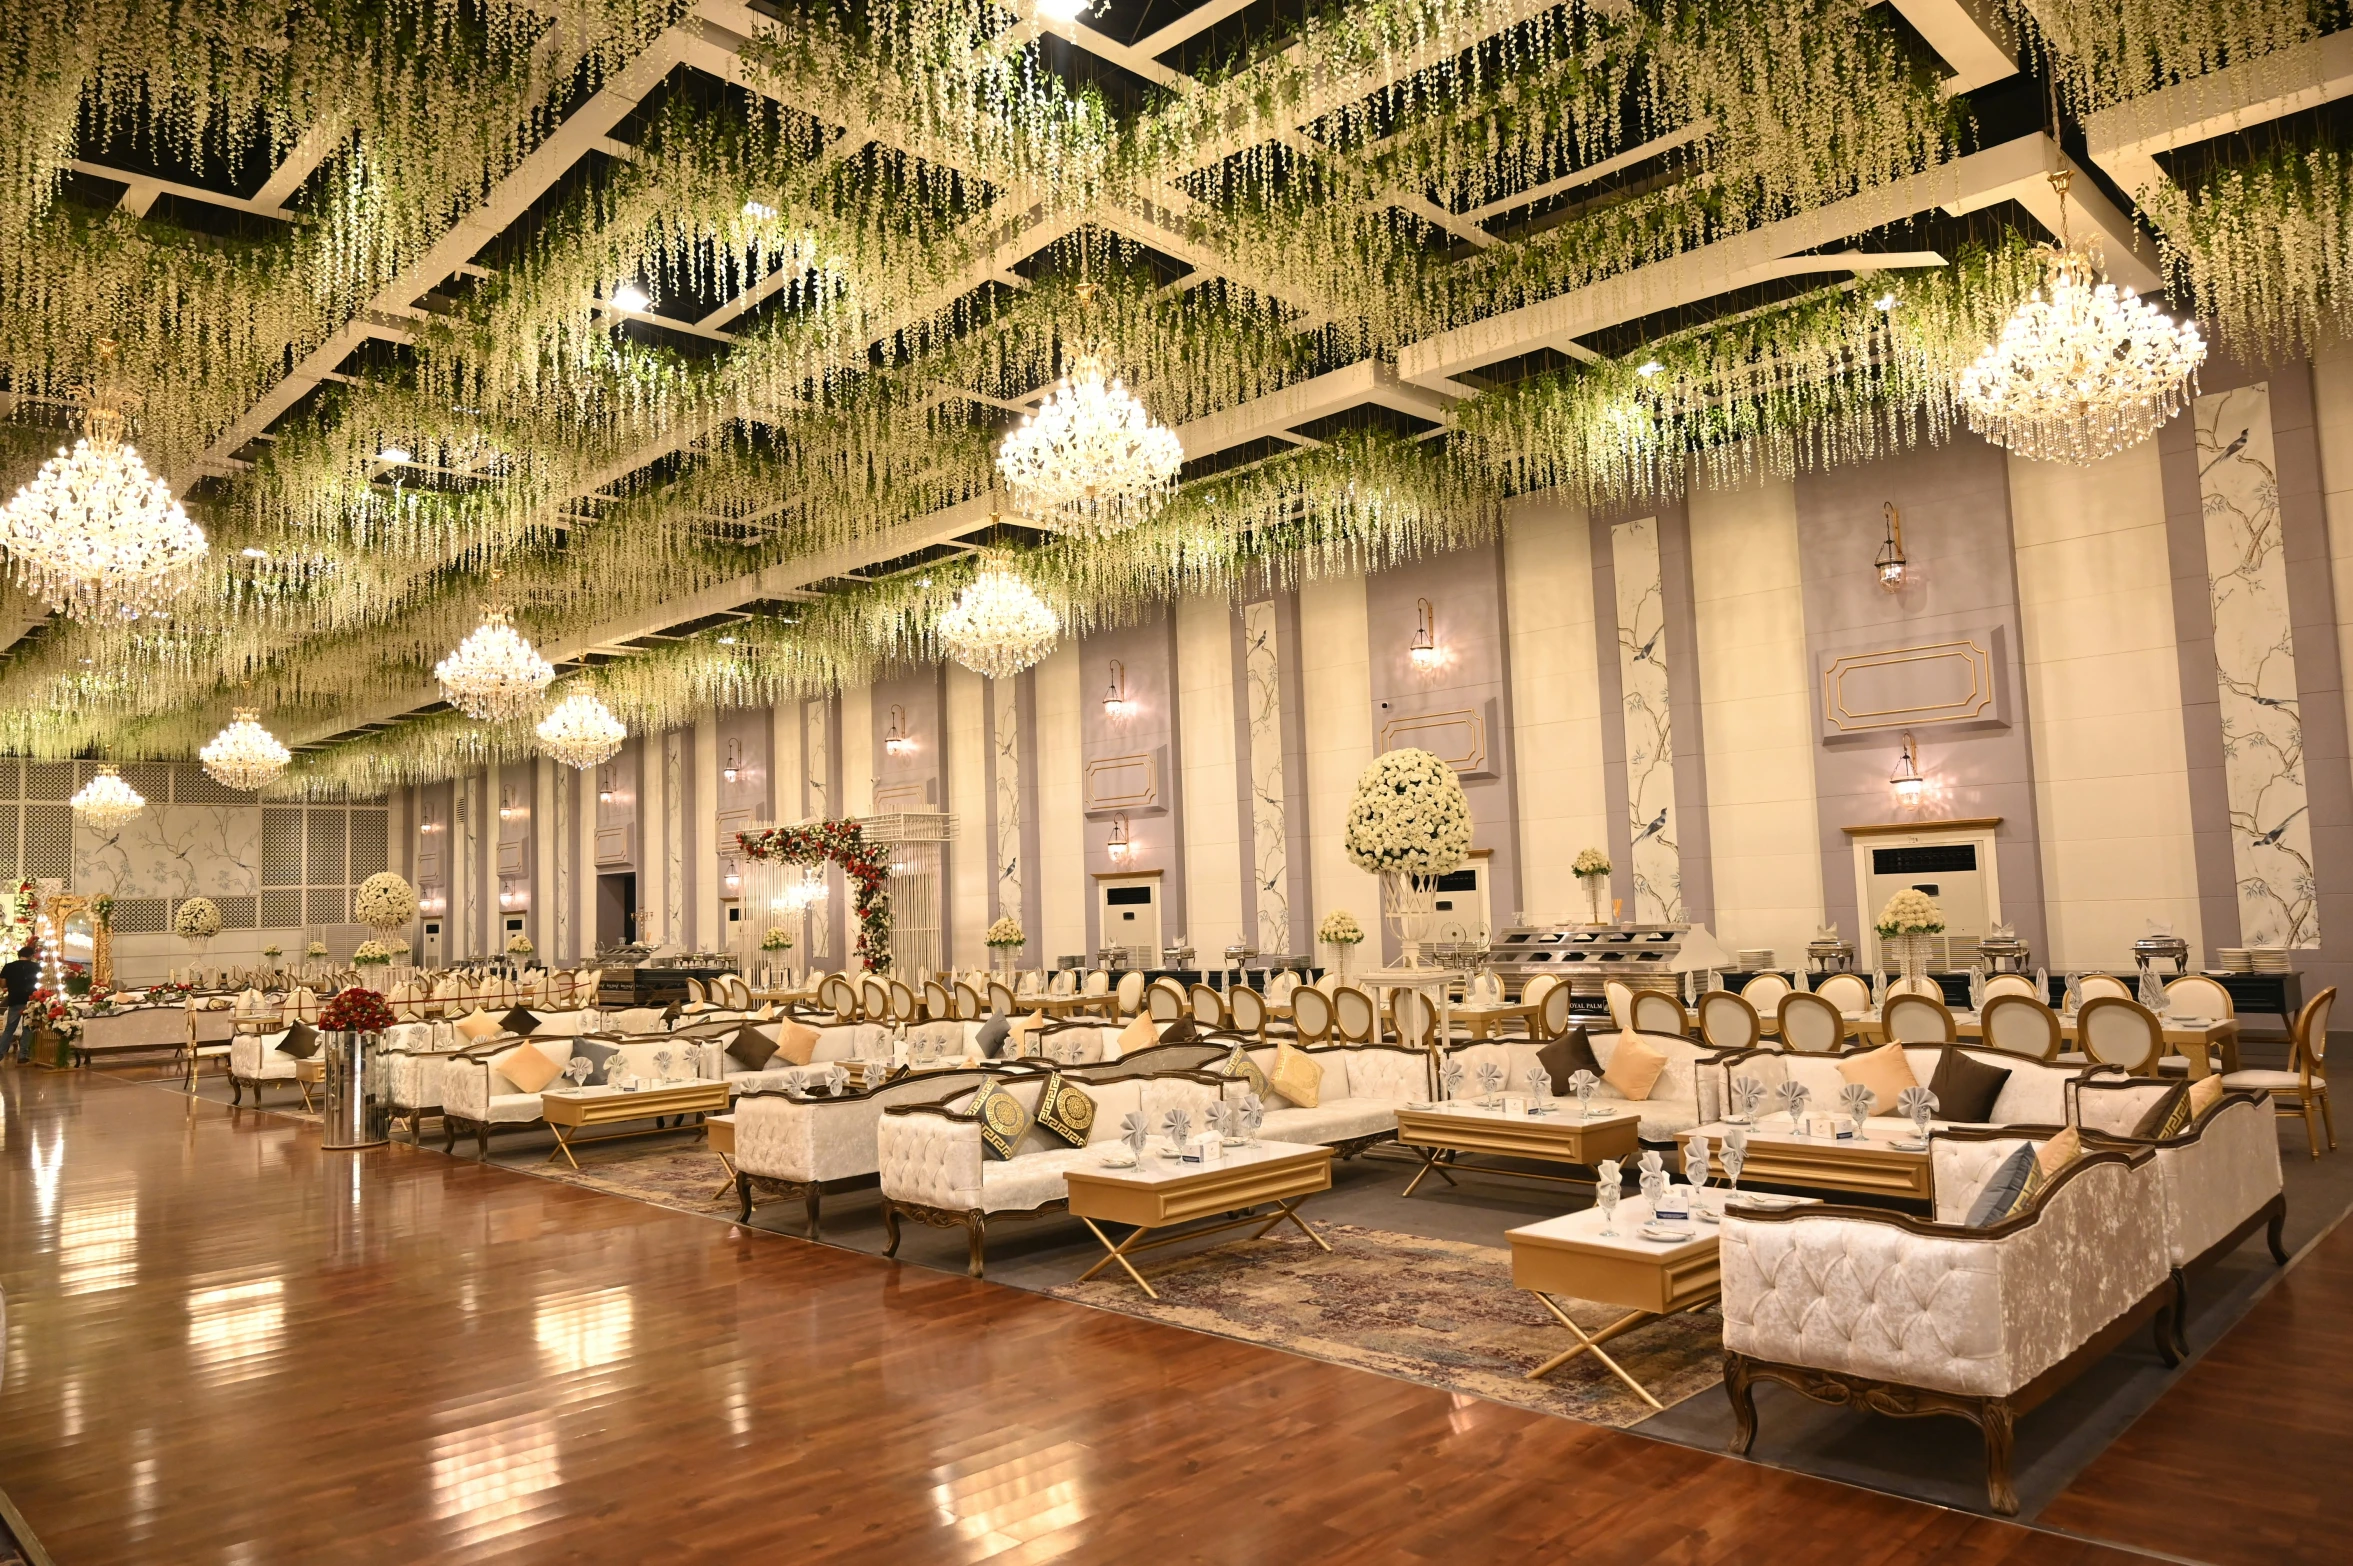 the lounge is decorated with plants and chairs